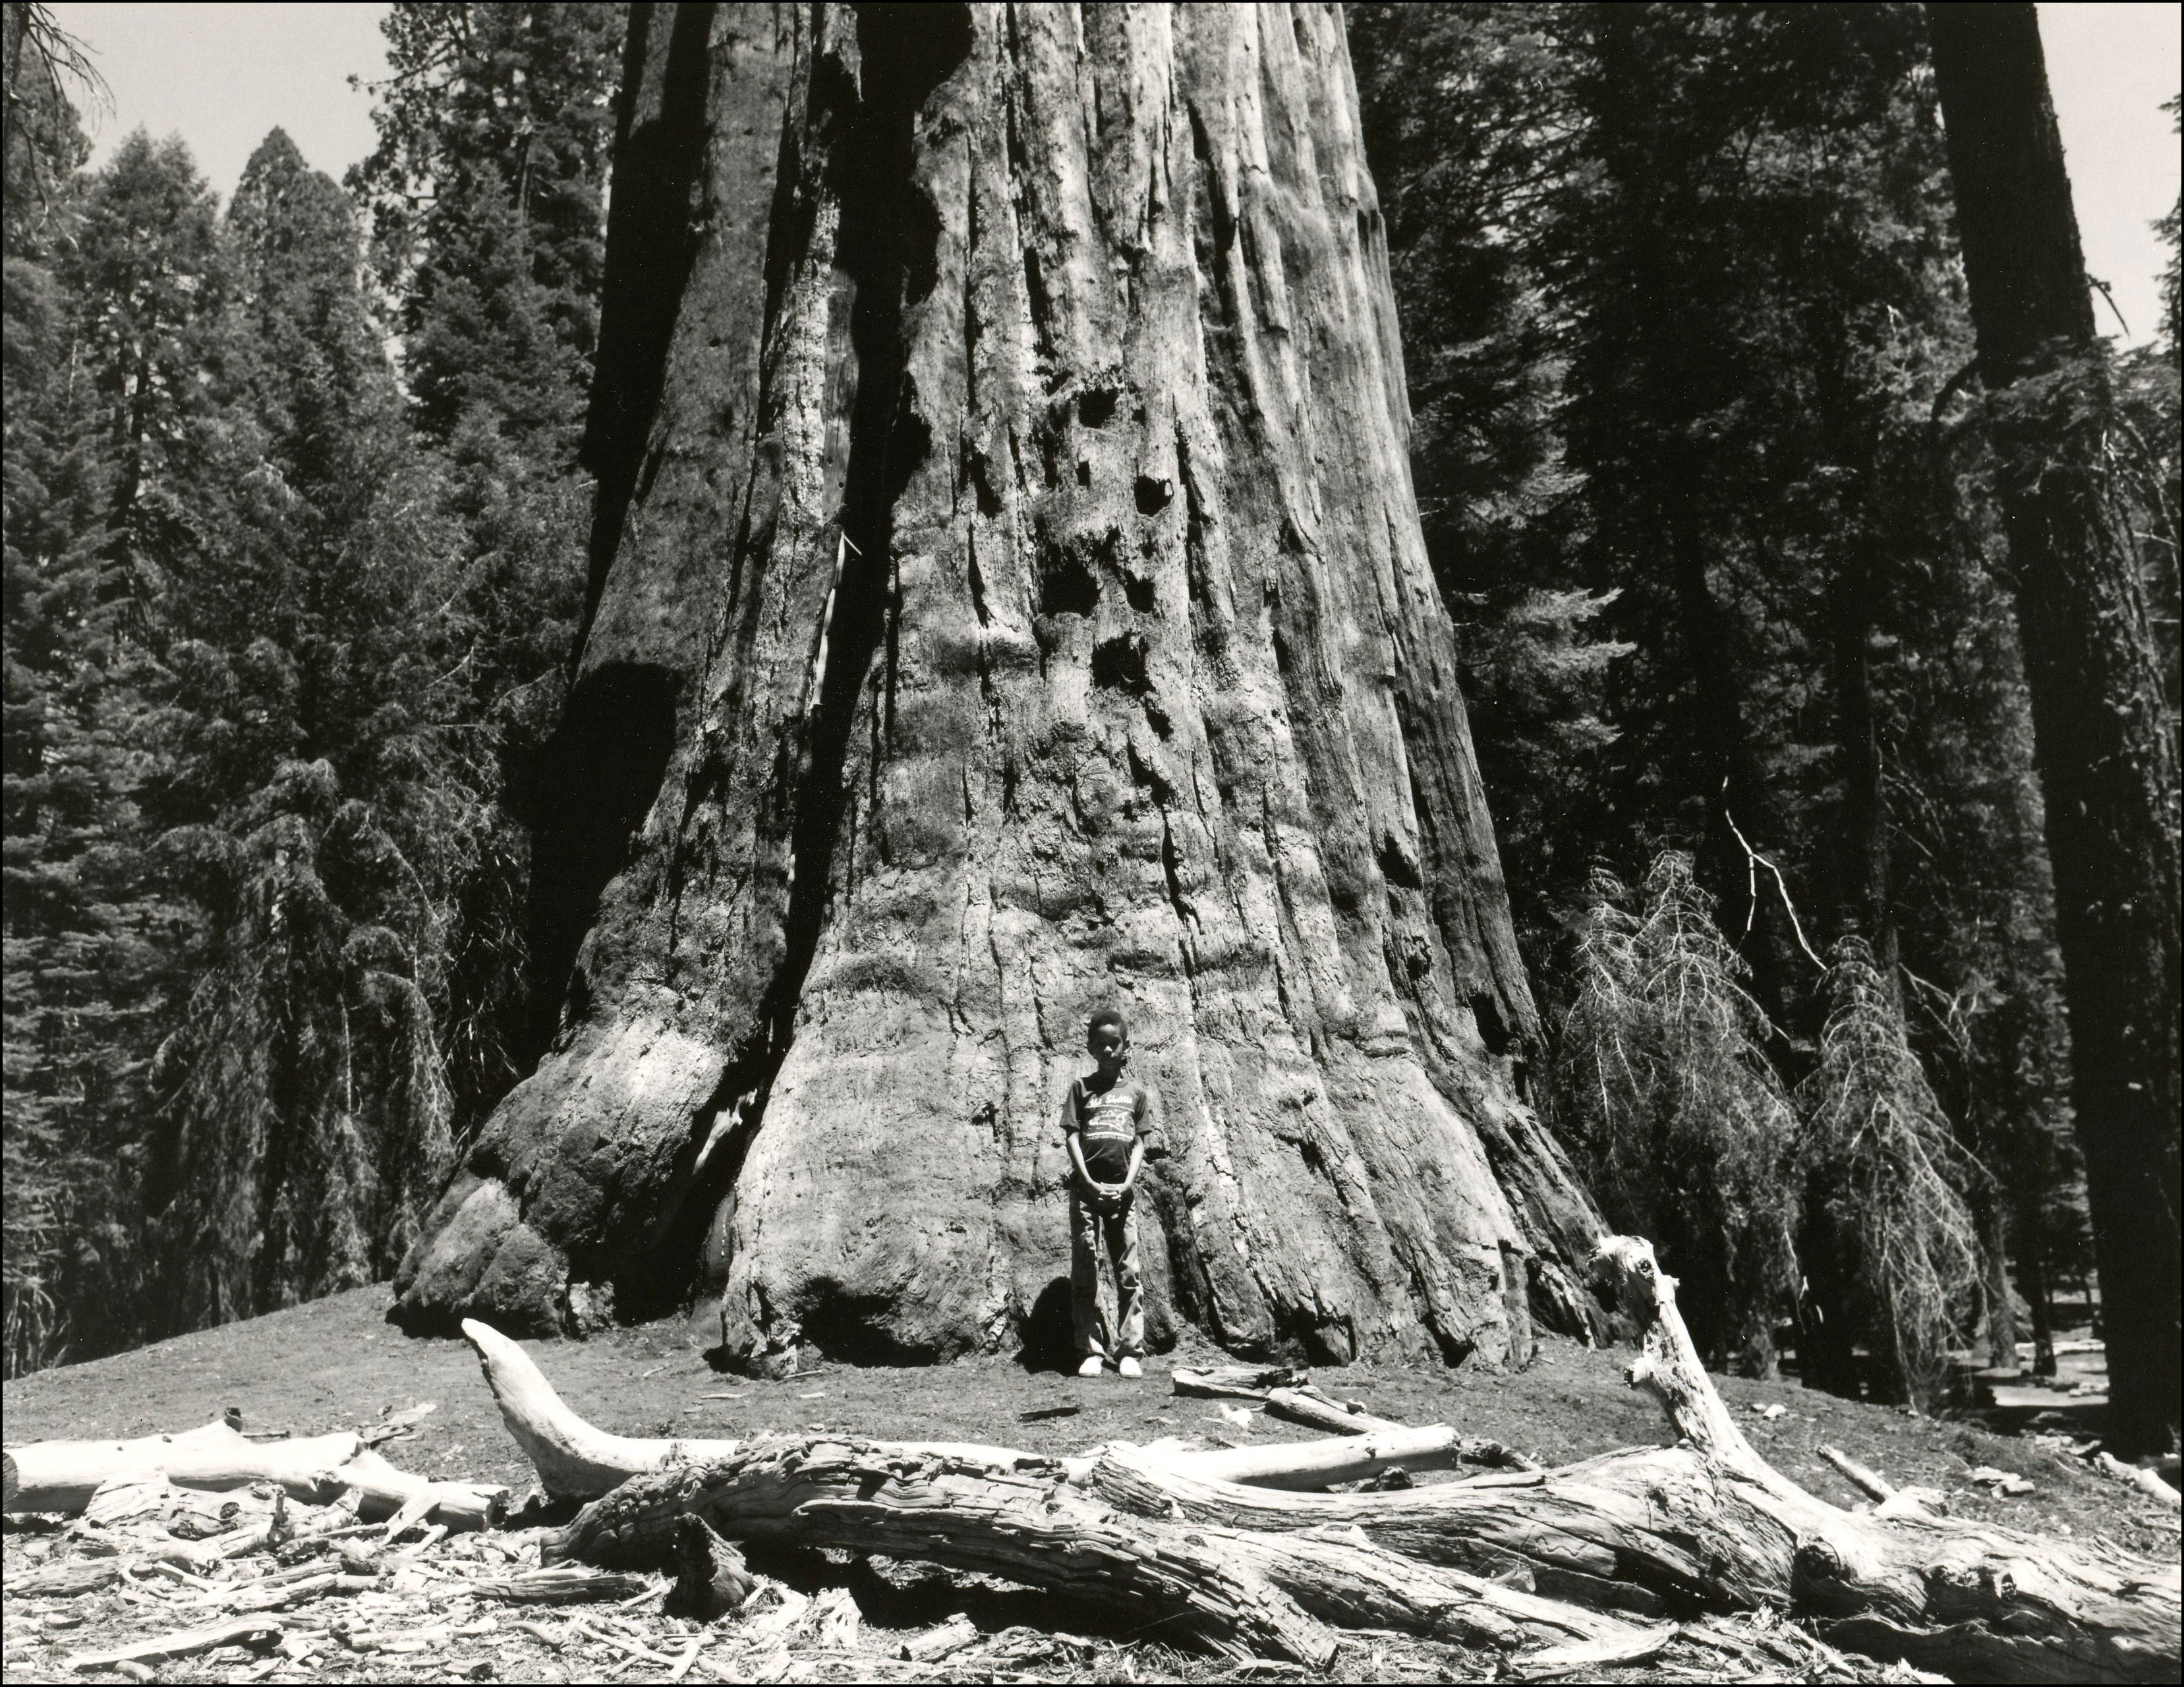 Boy standing in front of a giant sequoia tree